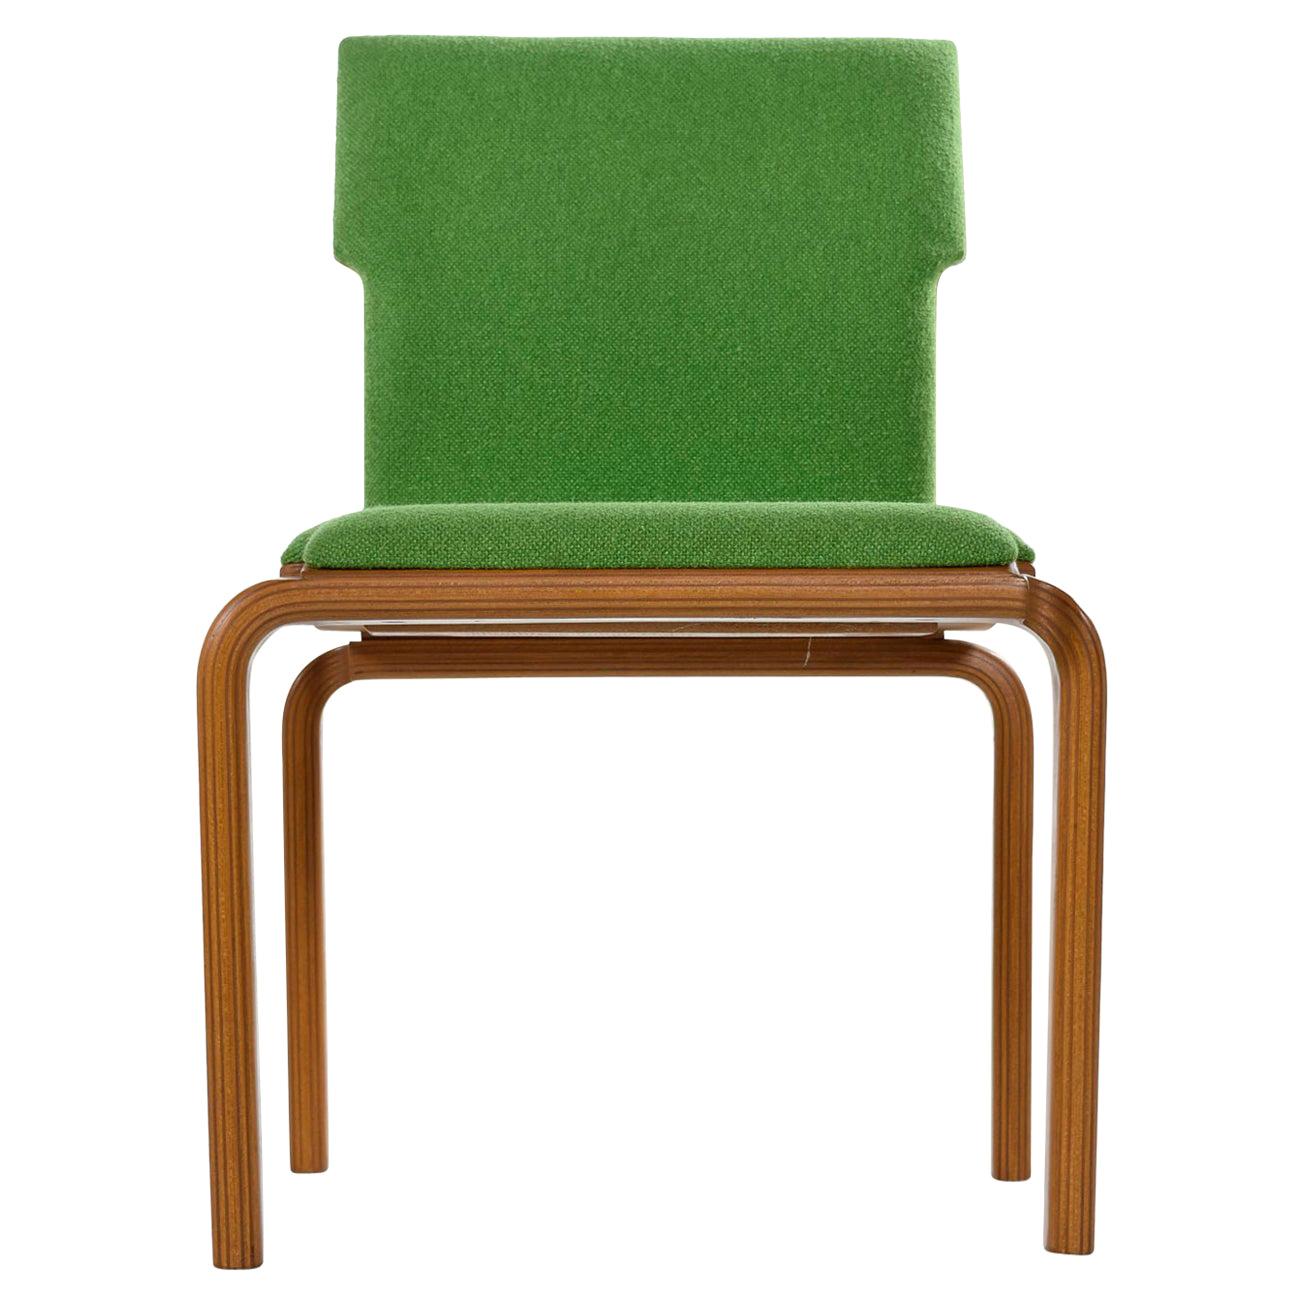 This is a set of (6) chairs. 

Stunning form and brilliant Kiwi green color make these Mid-Century Modern bentwood chairs Stand out from the crowd. Allow your eyes to flow through the sinuous body of the Bill Stephens inspired chairs. Like Bill